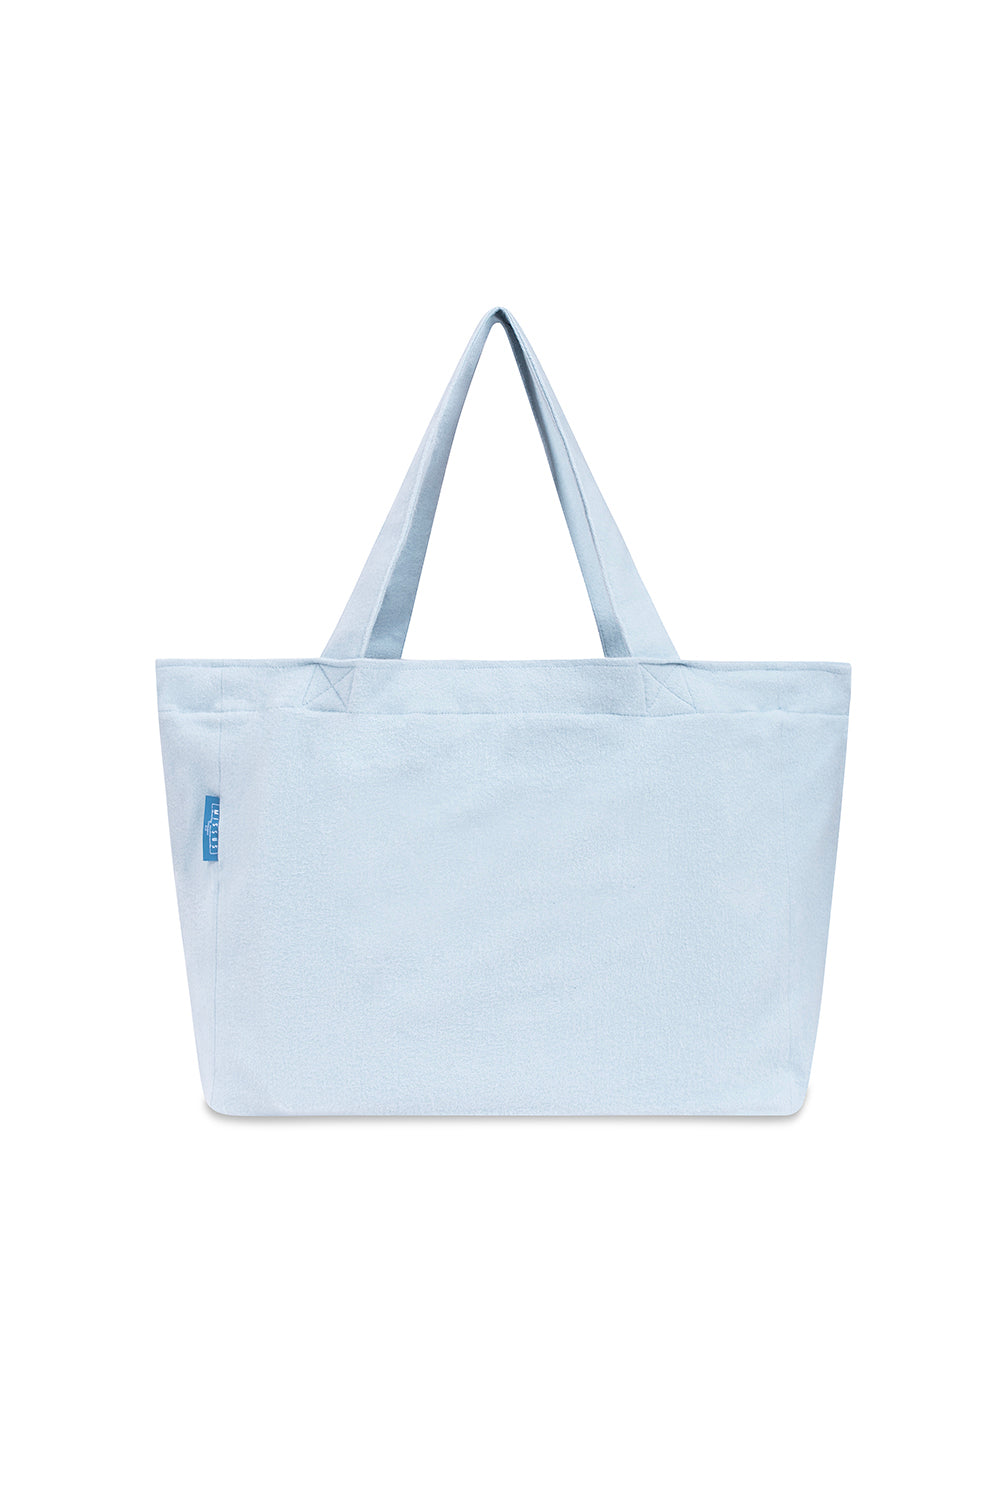 BEACH BAG MISSUS - BLUE (OUT OF STOCK)